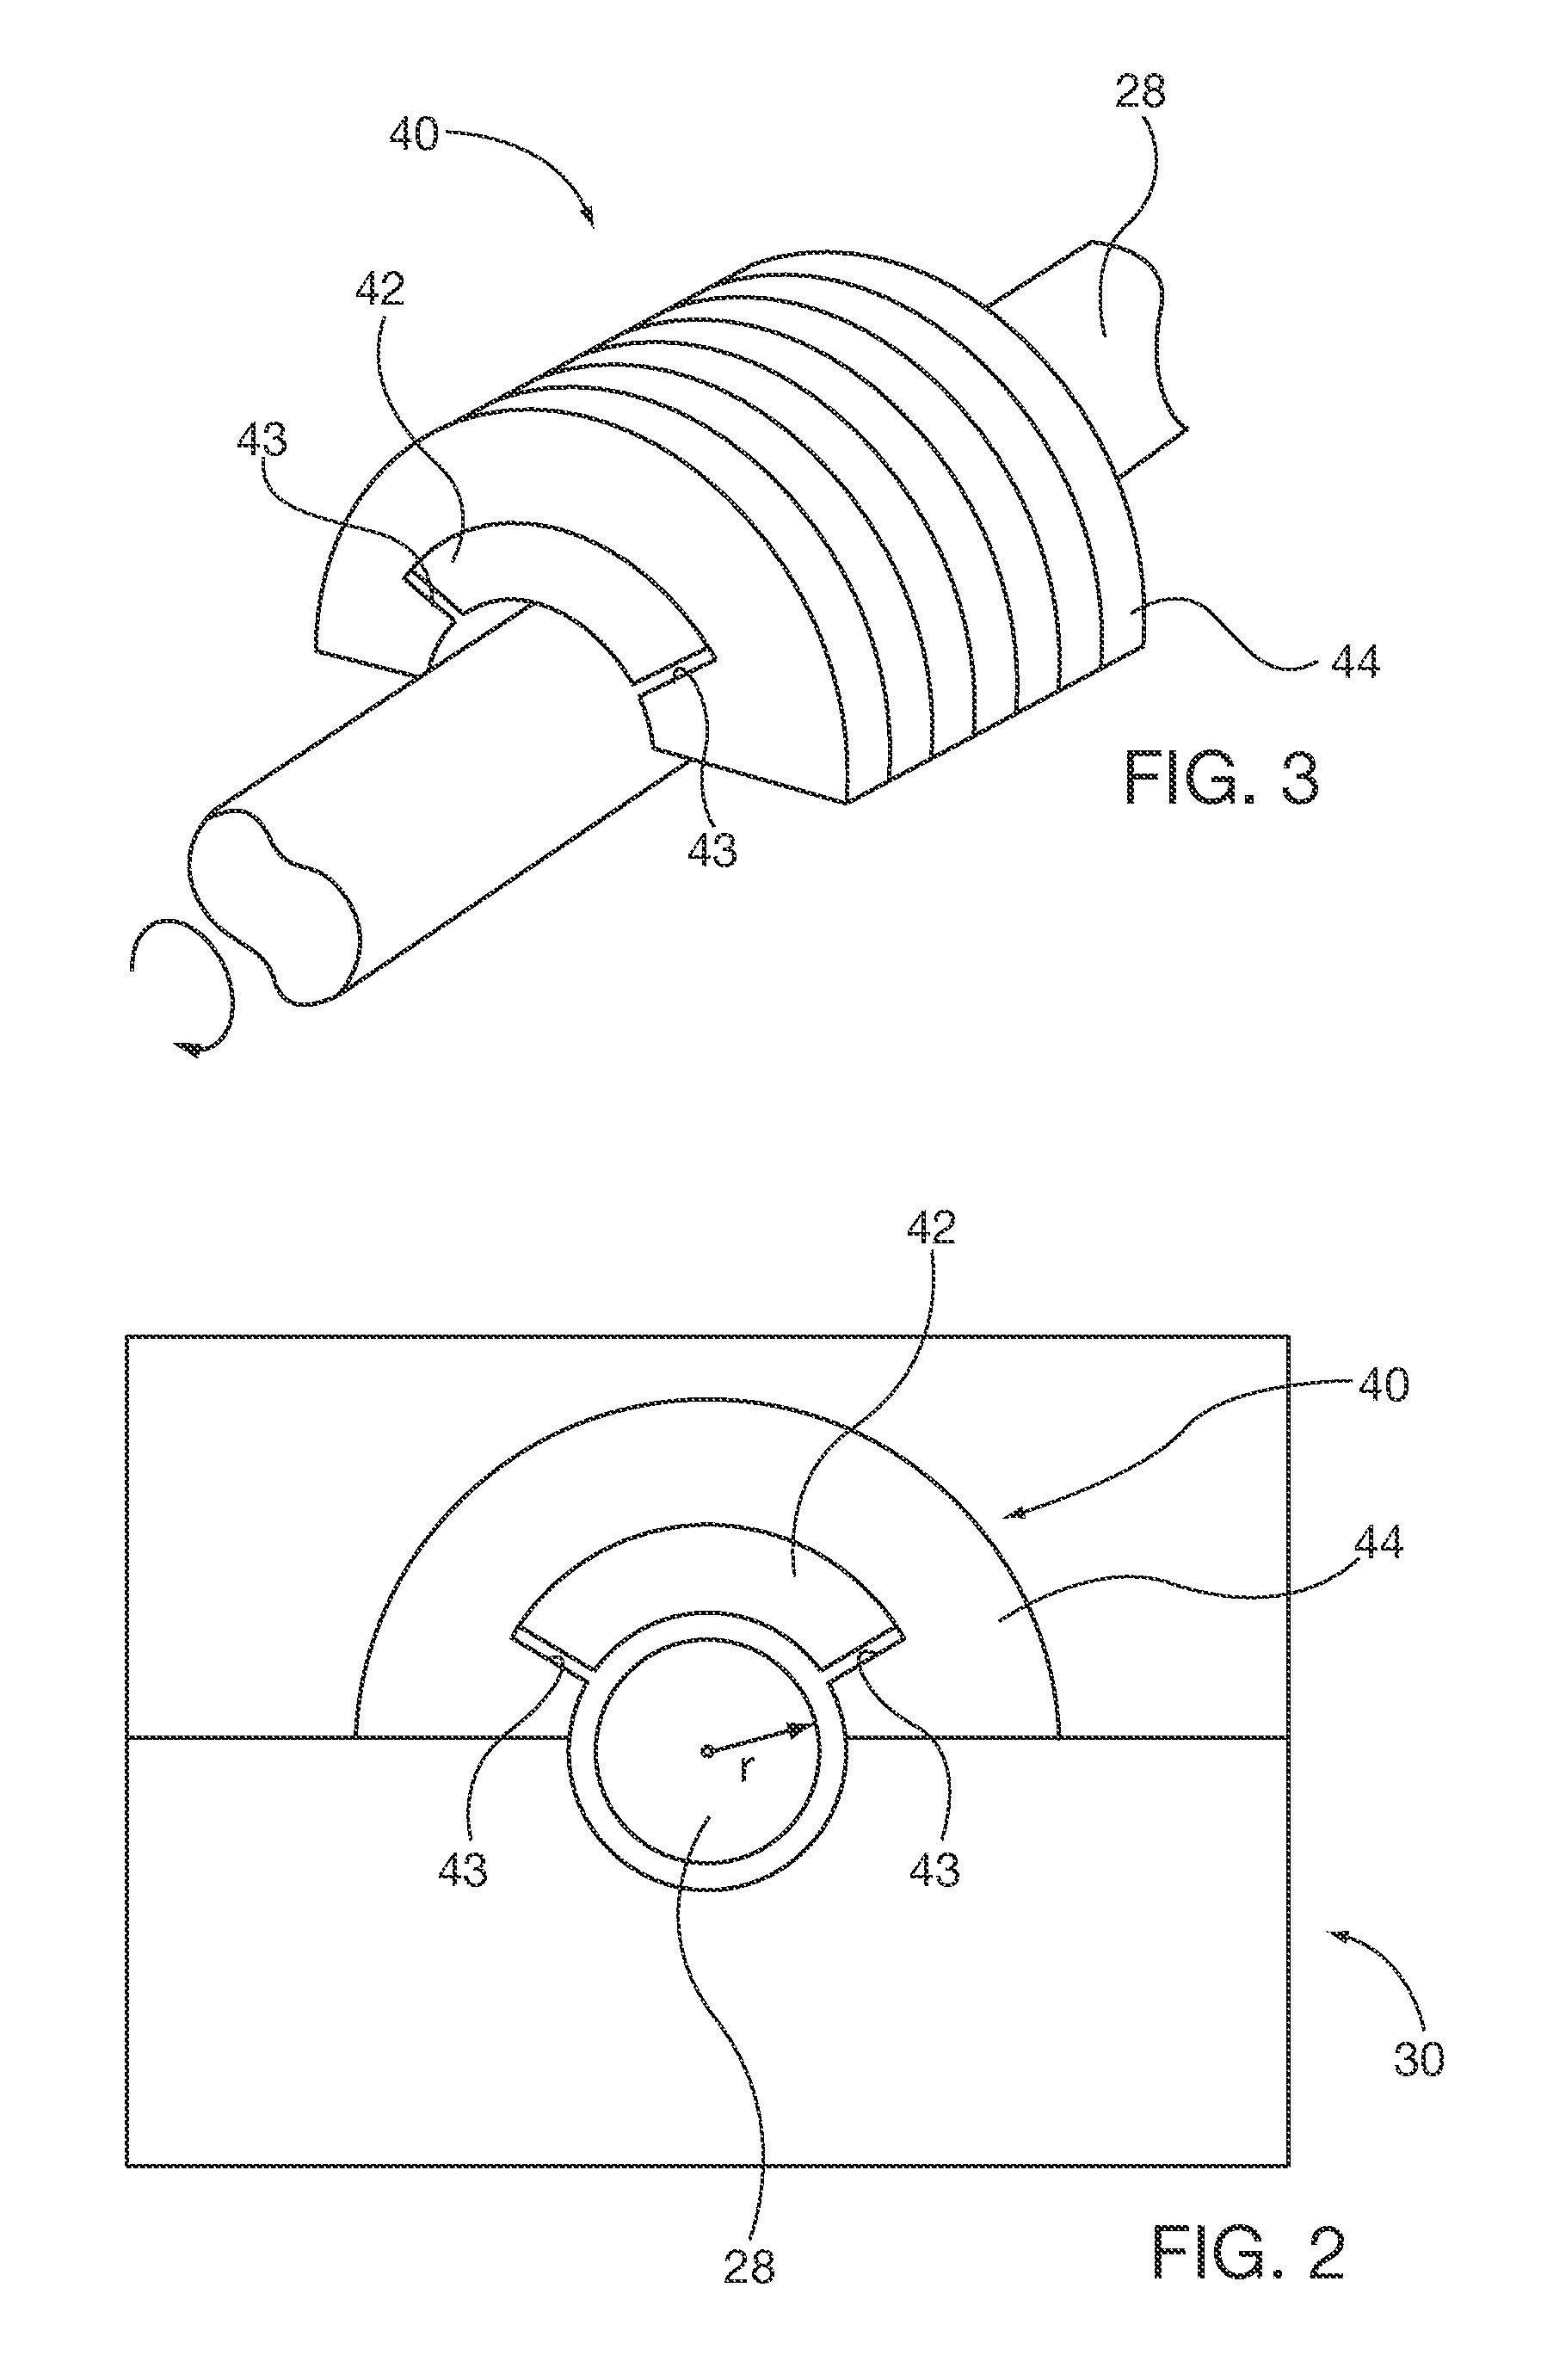 Passive magnetic bearings for rotating equipment including induction machines